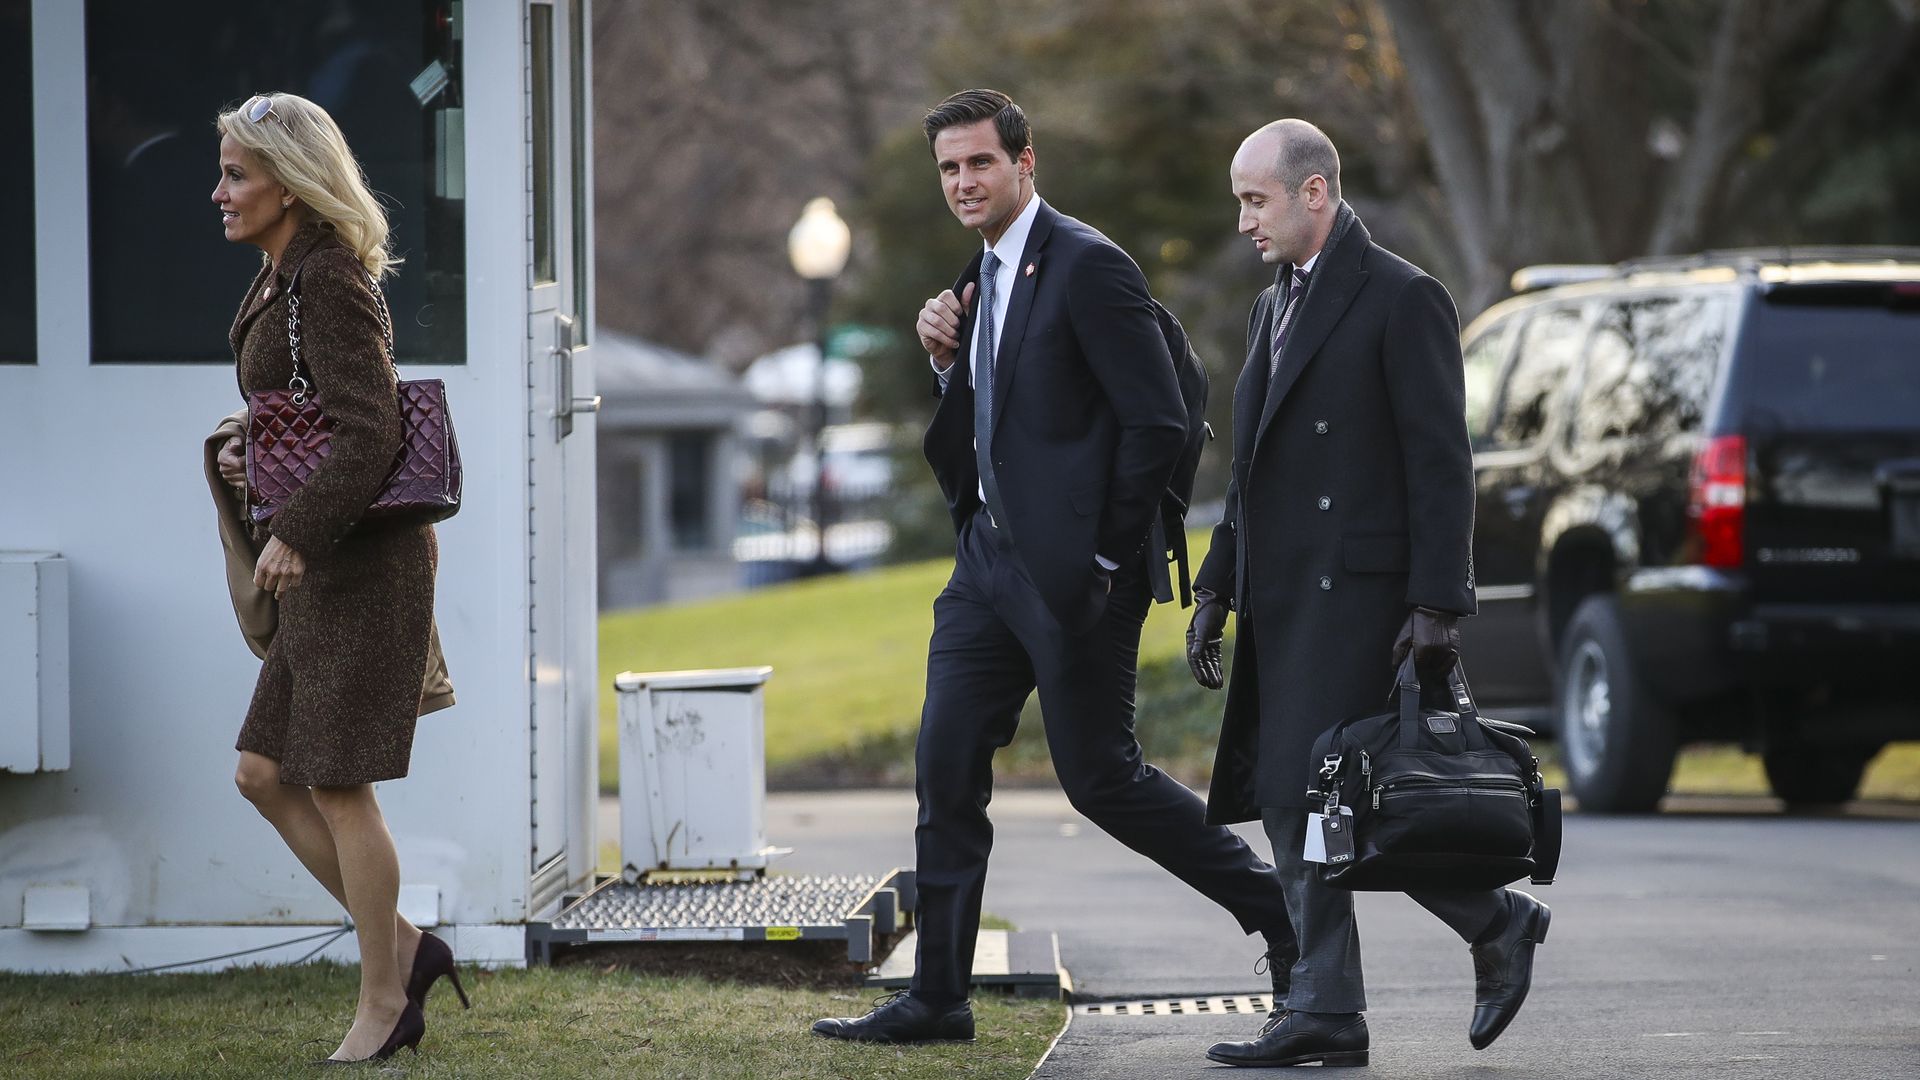 Johnny McEntee walks in the White House driveway